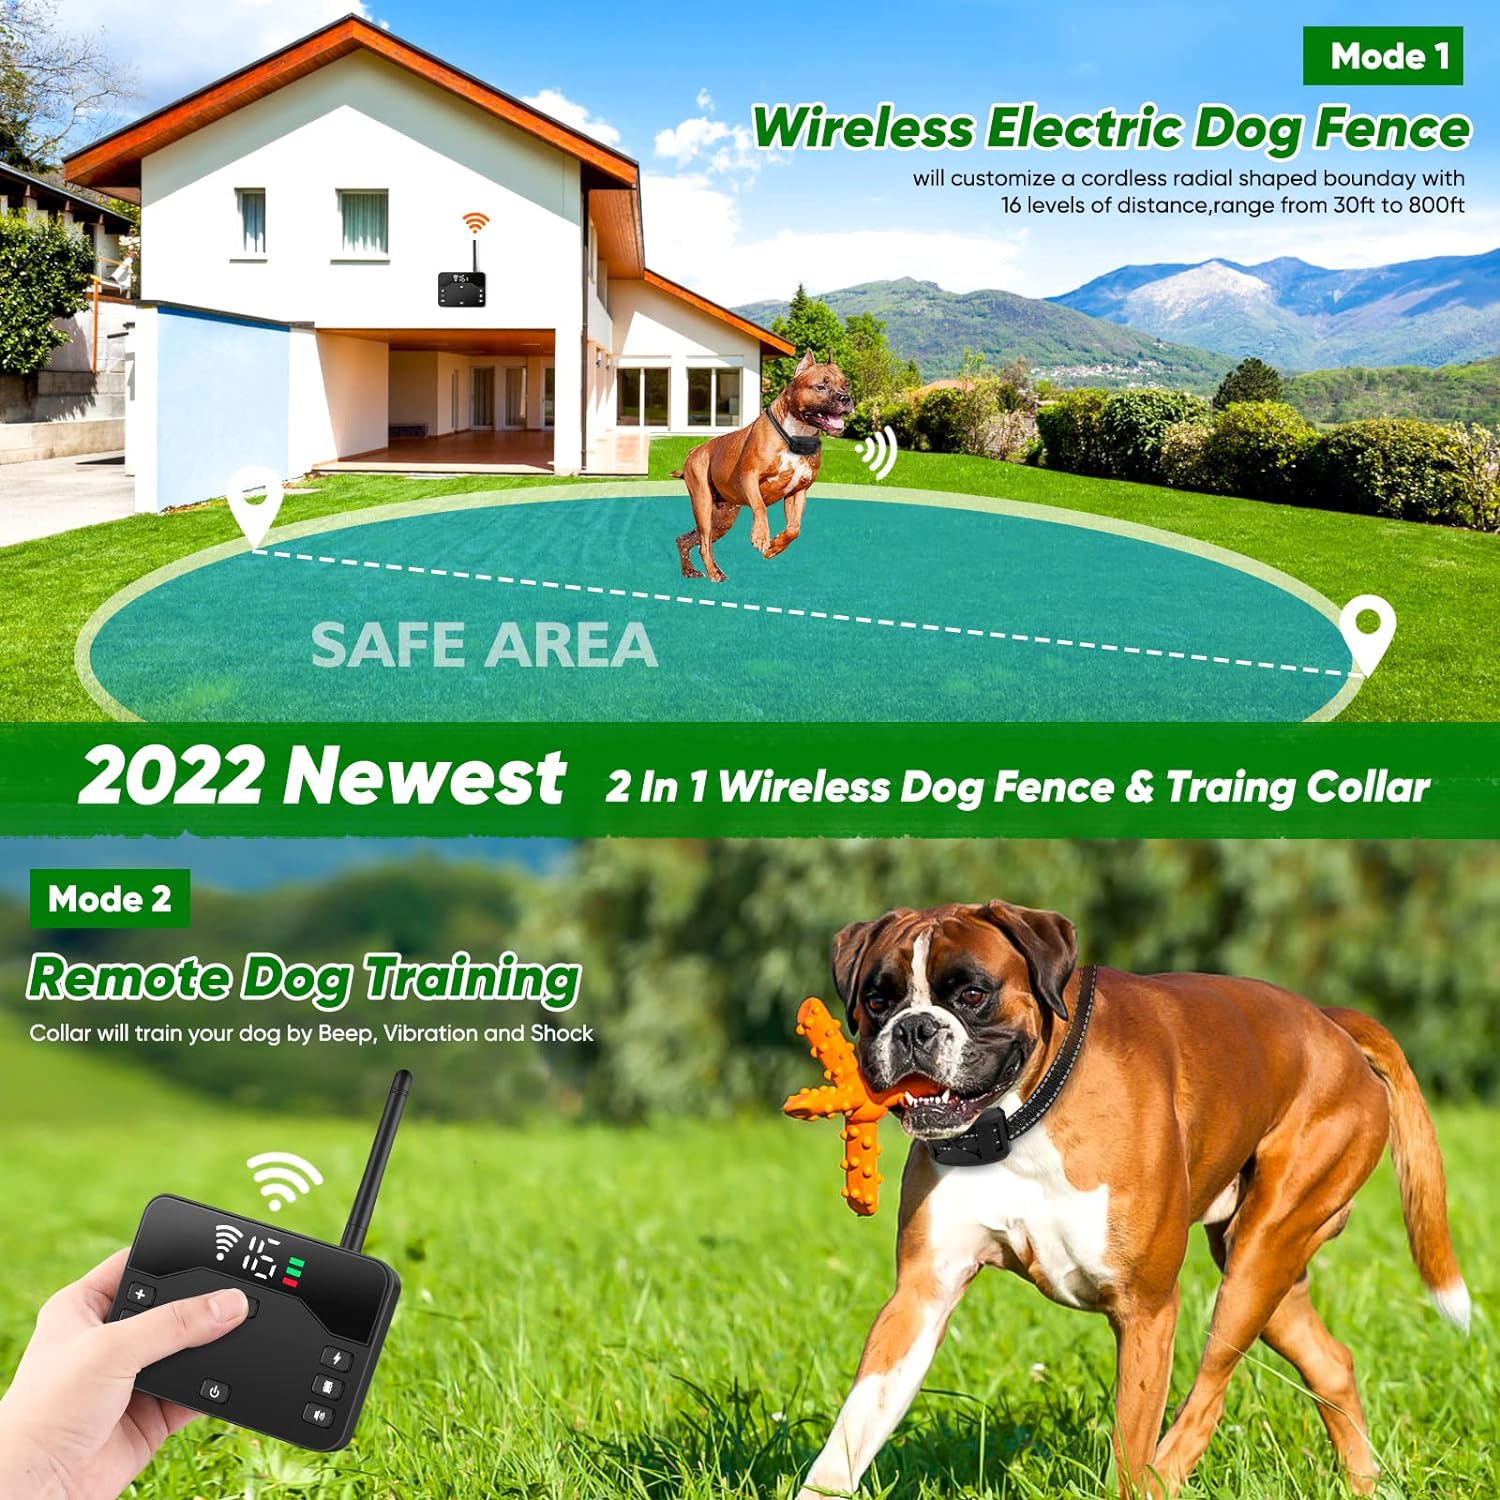 Wireless Dog Fence,2023 Wireless Boundary Containment System,2-in-1 Electric Dog Fence Remote Training Collar,Adjustable Vibration Shock,IP65 Waterproof Training Collar for Large and Medium Dogs